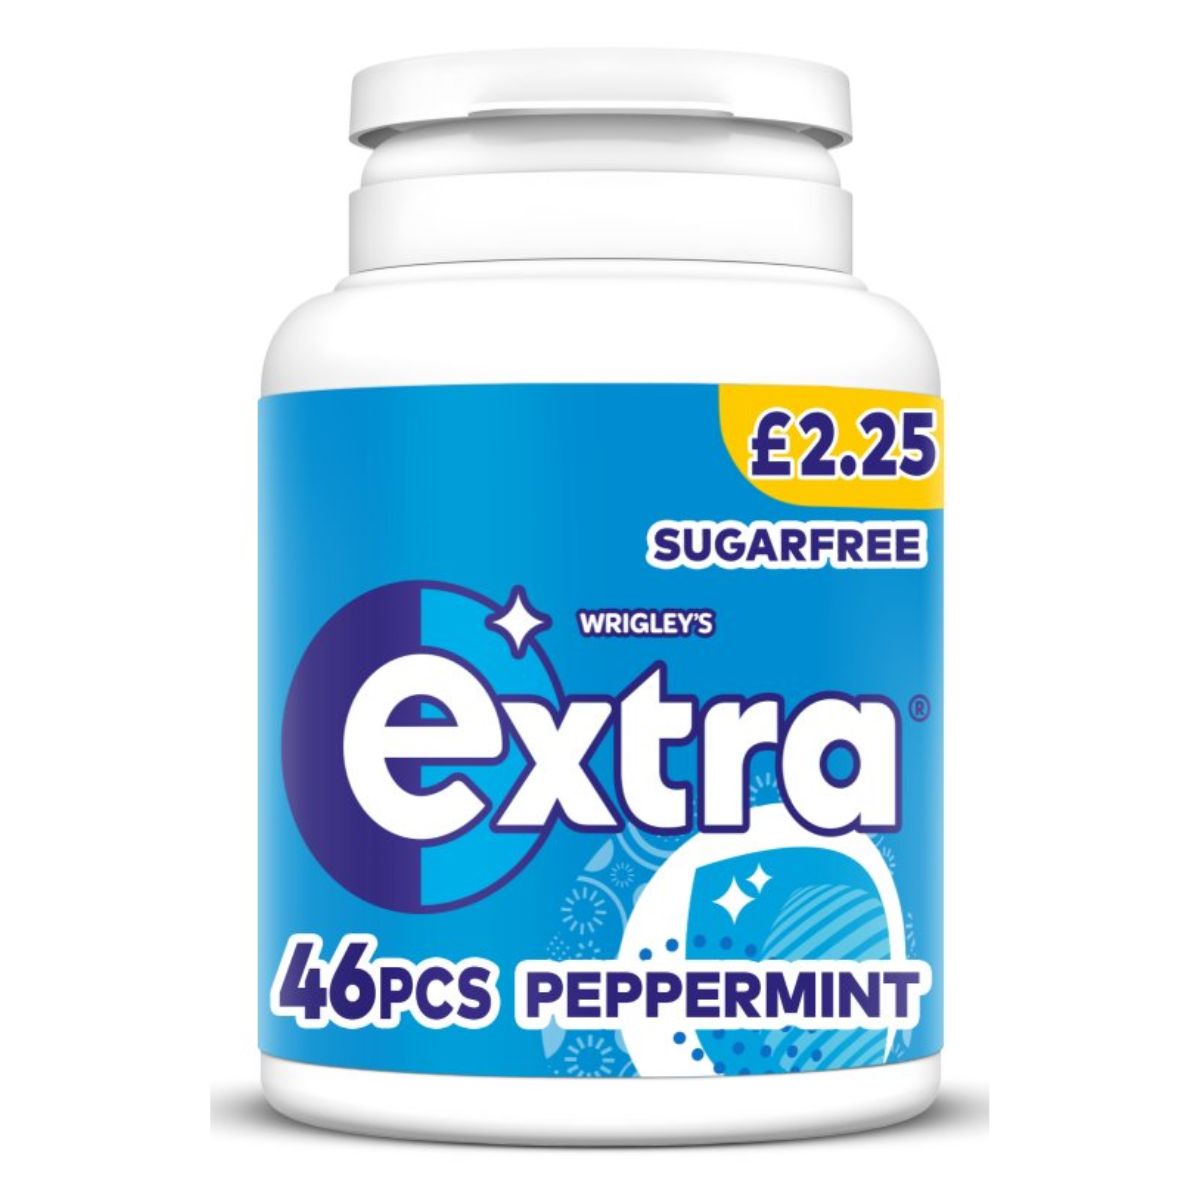 Extra - Peppermint Sugarfree Chewing Gum Bottle - 46pcs 60 capsules.